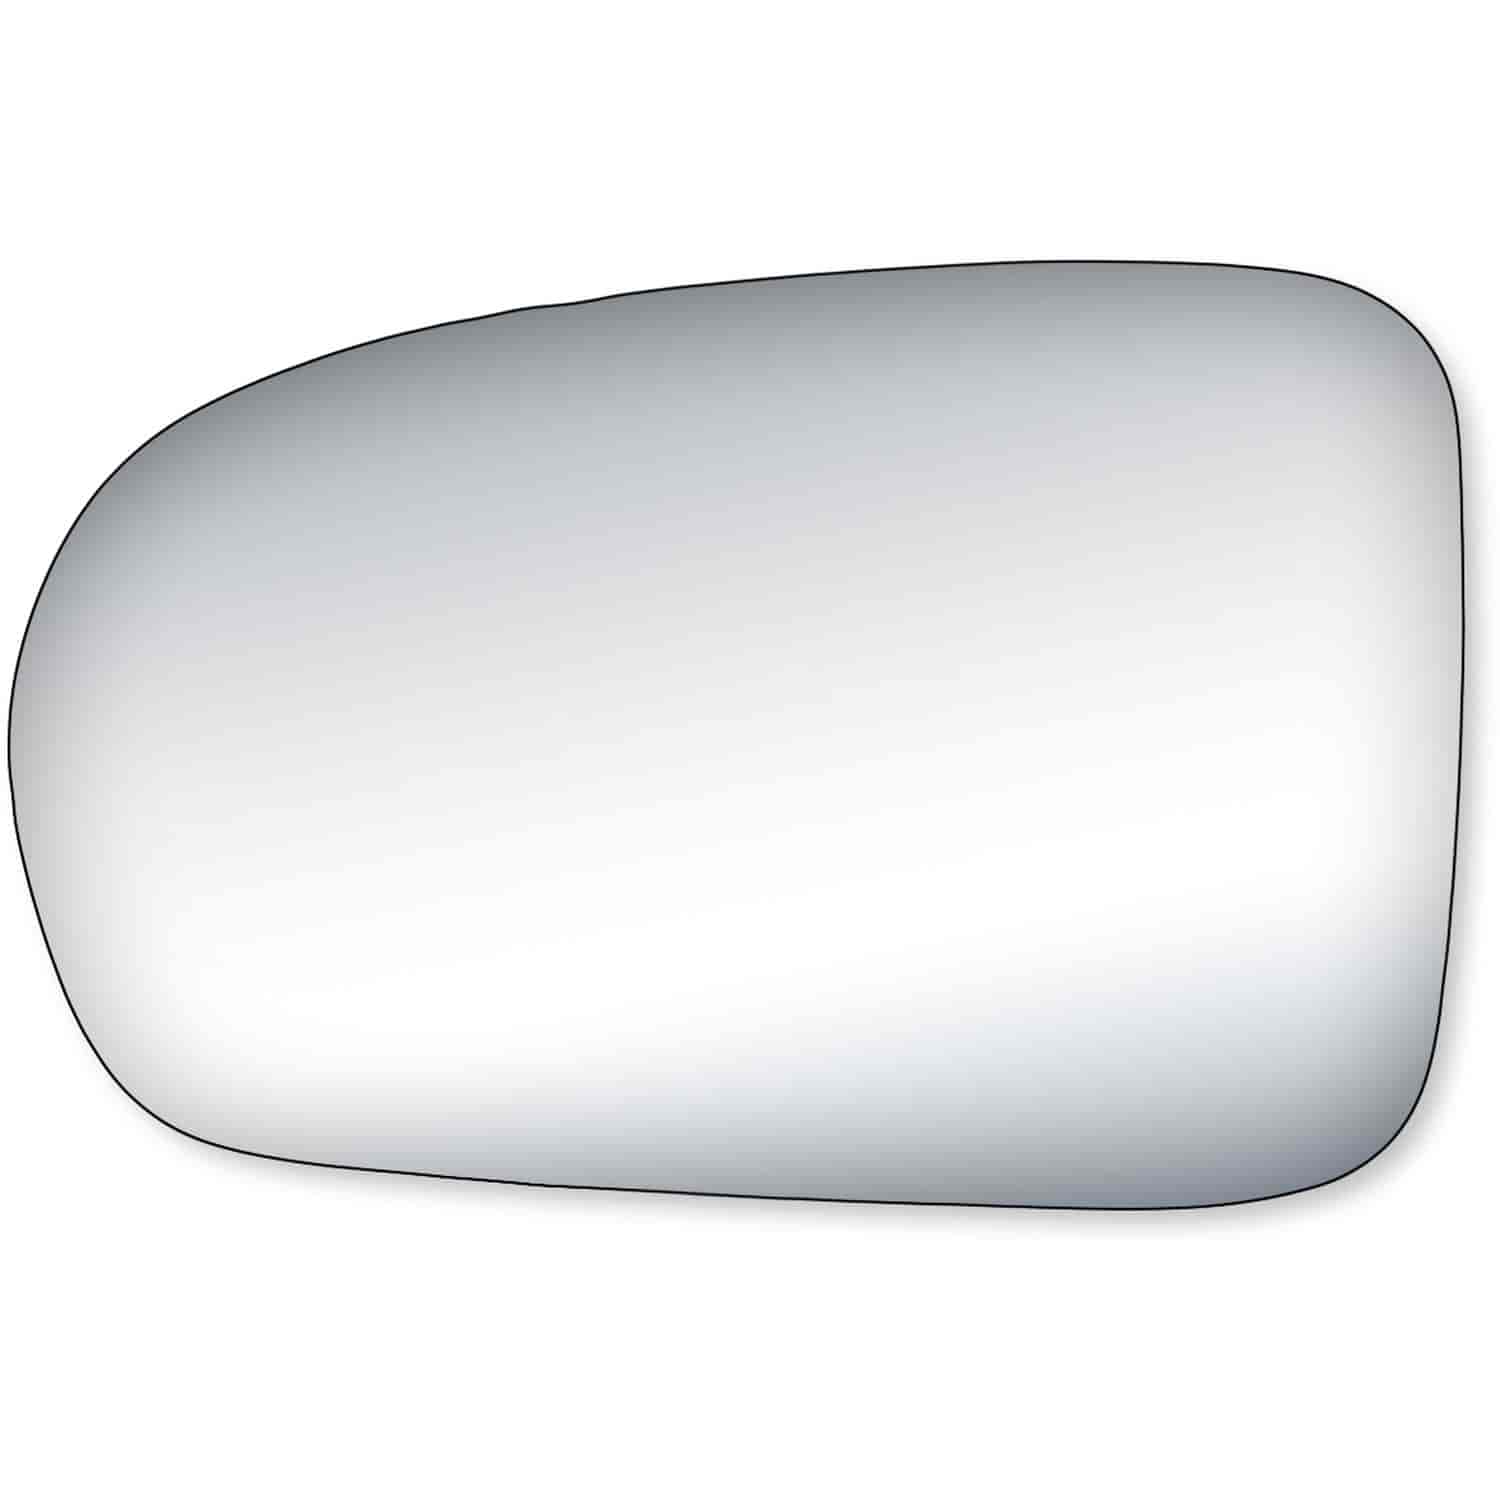 Replacement Glass for 01-05 Civic Coupe/ Sedan the